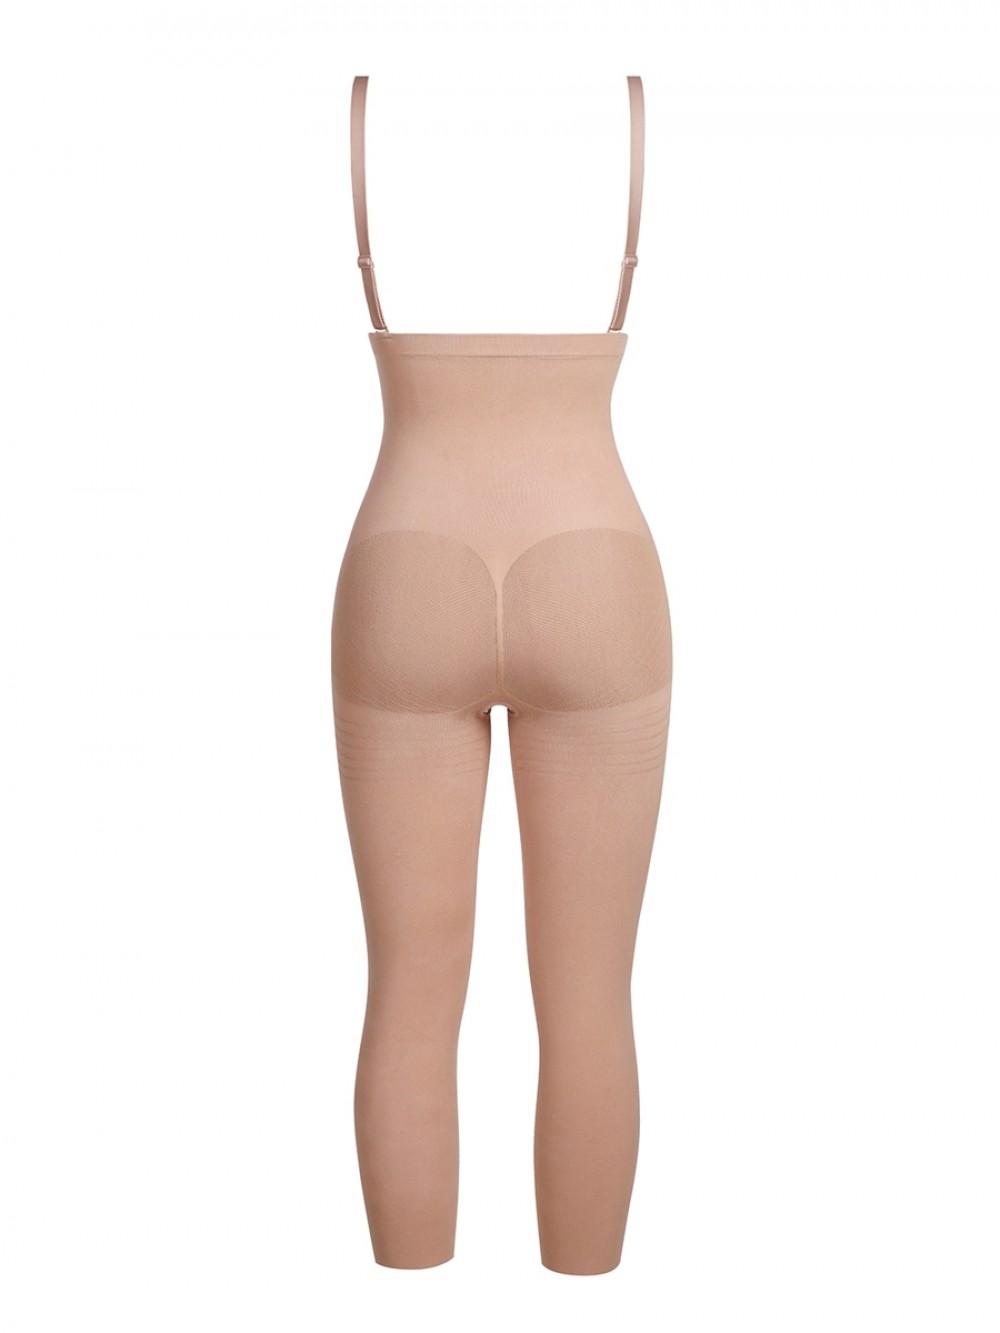 Nude Seamless Adjustable Straps Full Body Shaper Shaping Comfort